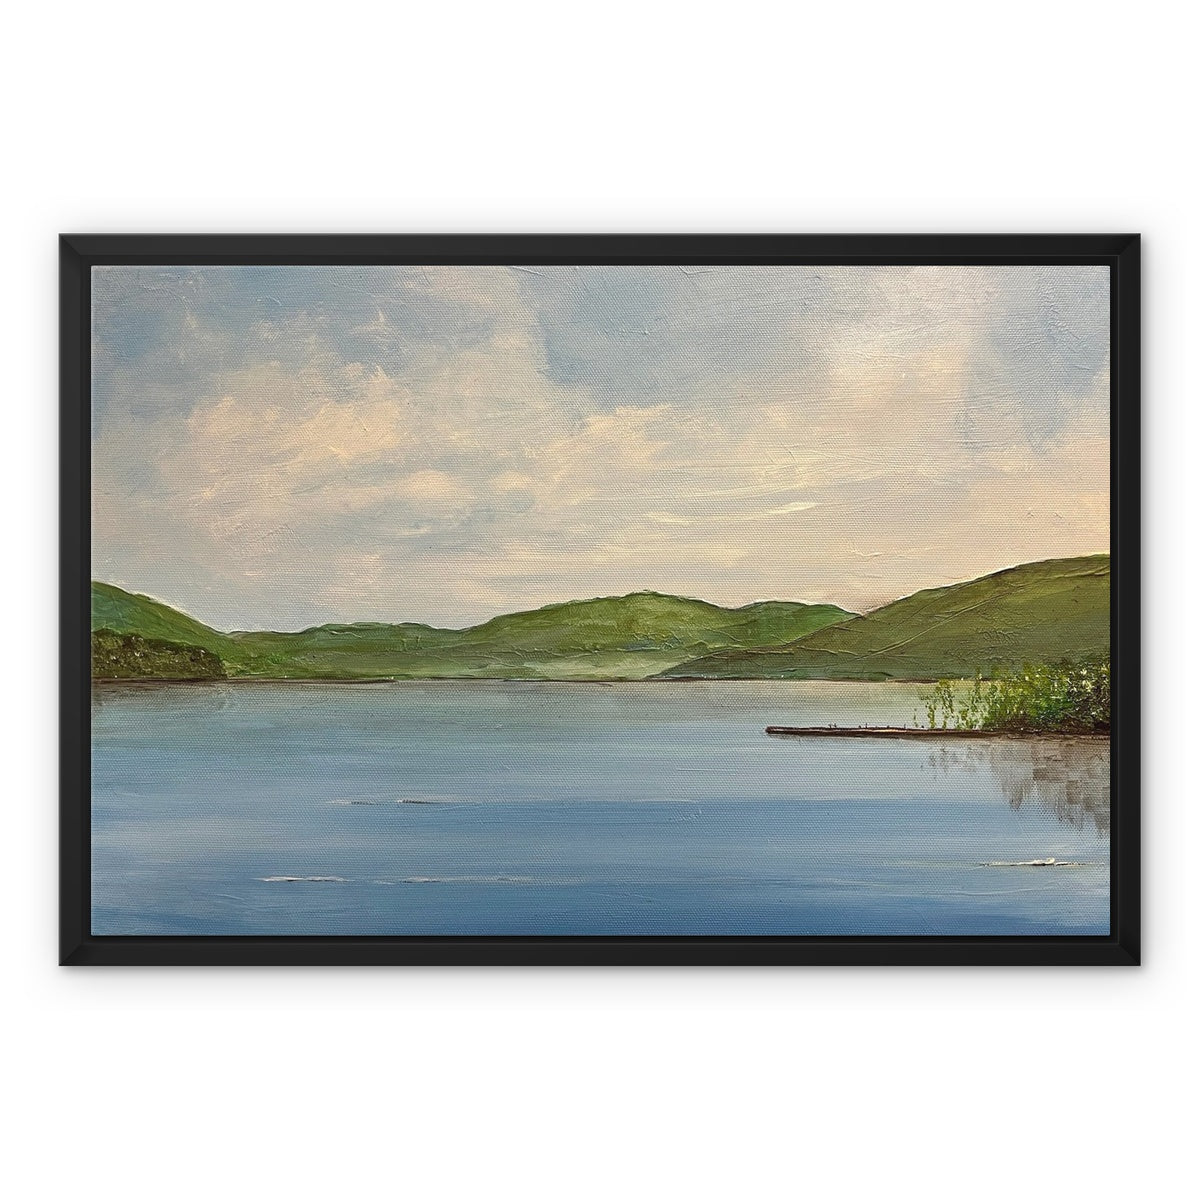 Loch Tay ii Painting | Framed Canvas-Floating Framed Canvas Prints-Scottish Lochs & Mountains Art Gallery-24"x18"-Black Frame-Paintings, Prints, Homeware, Art Gifts From Scotland By Scottish Artist Kevin Hunter